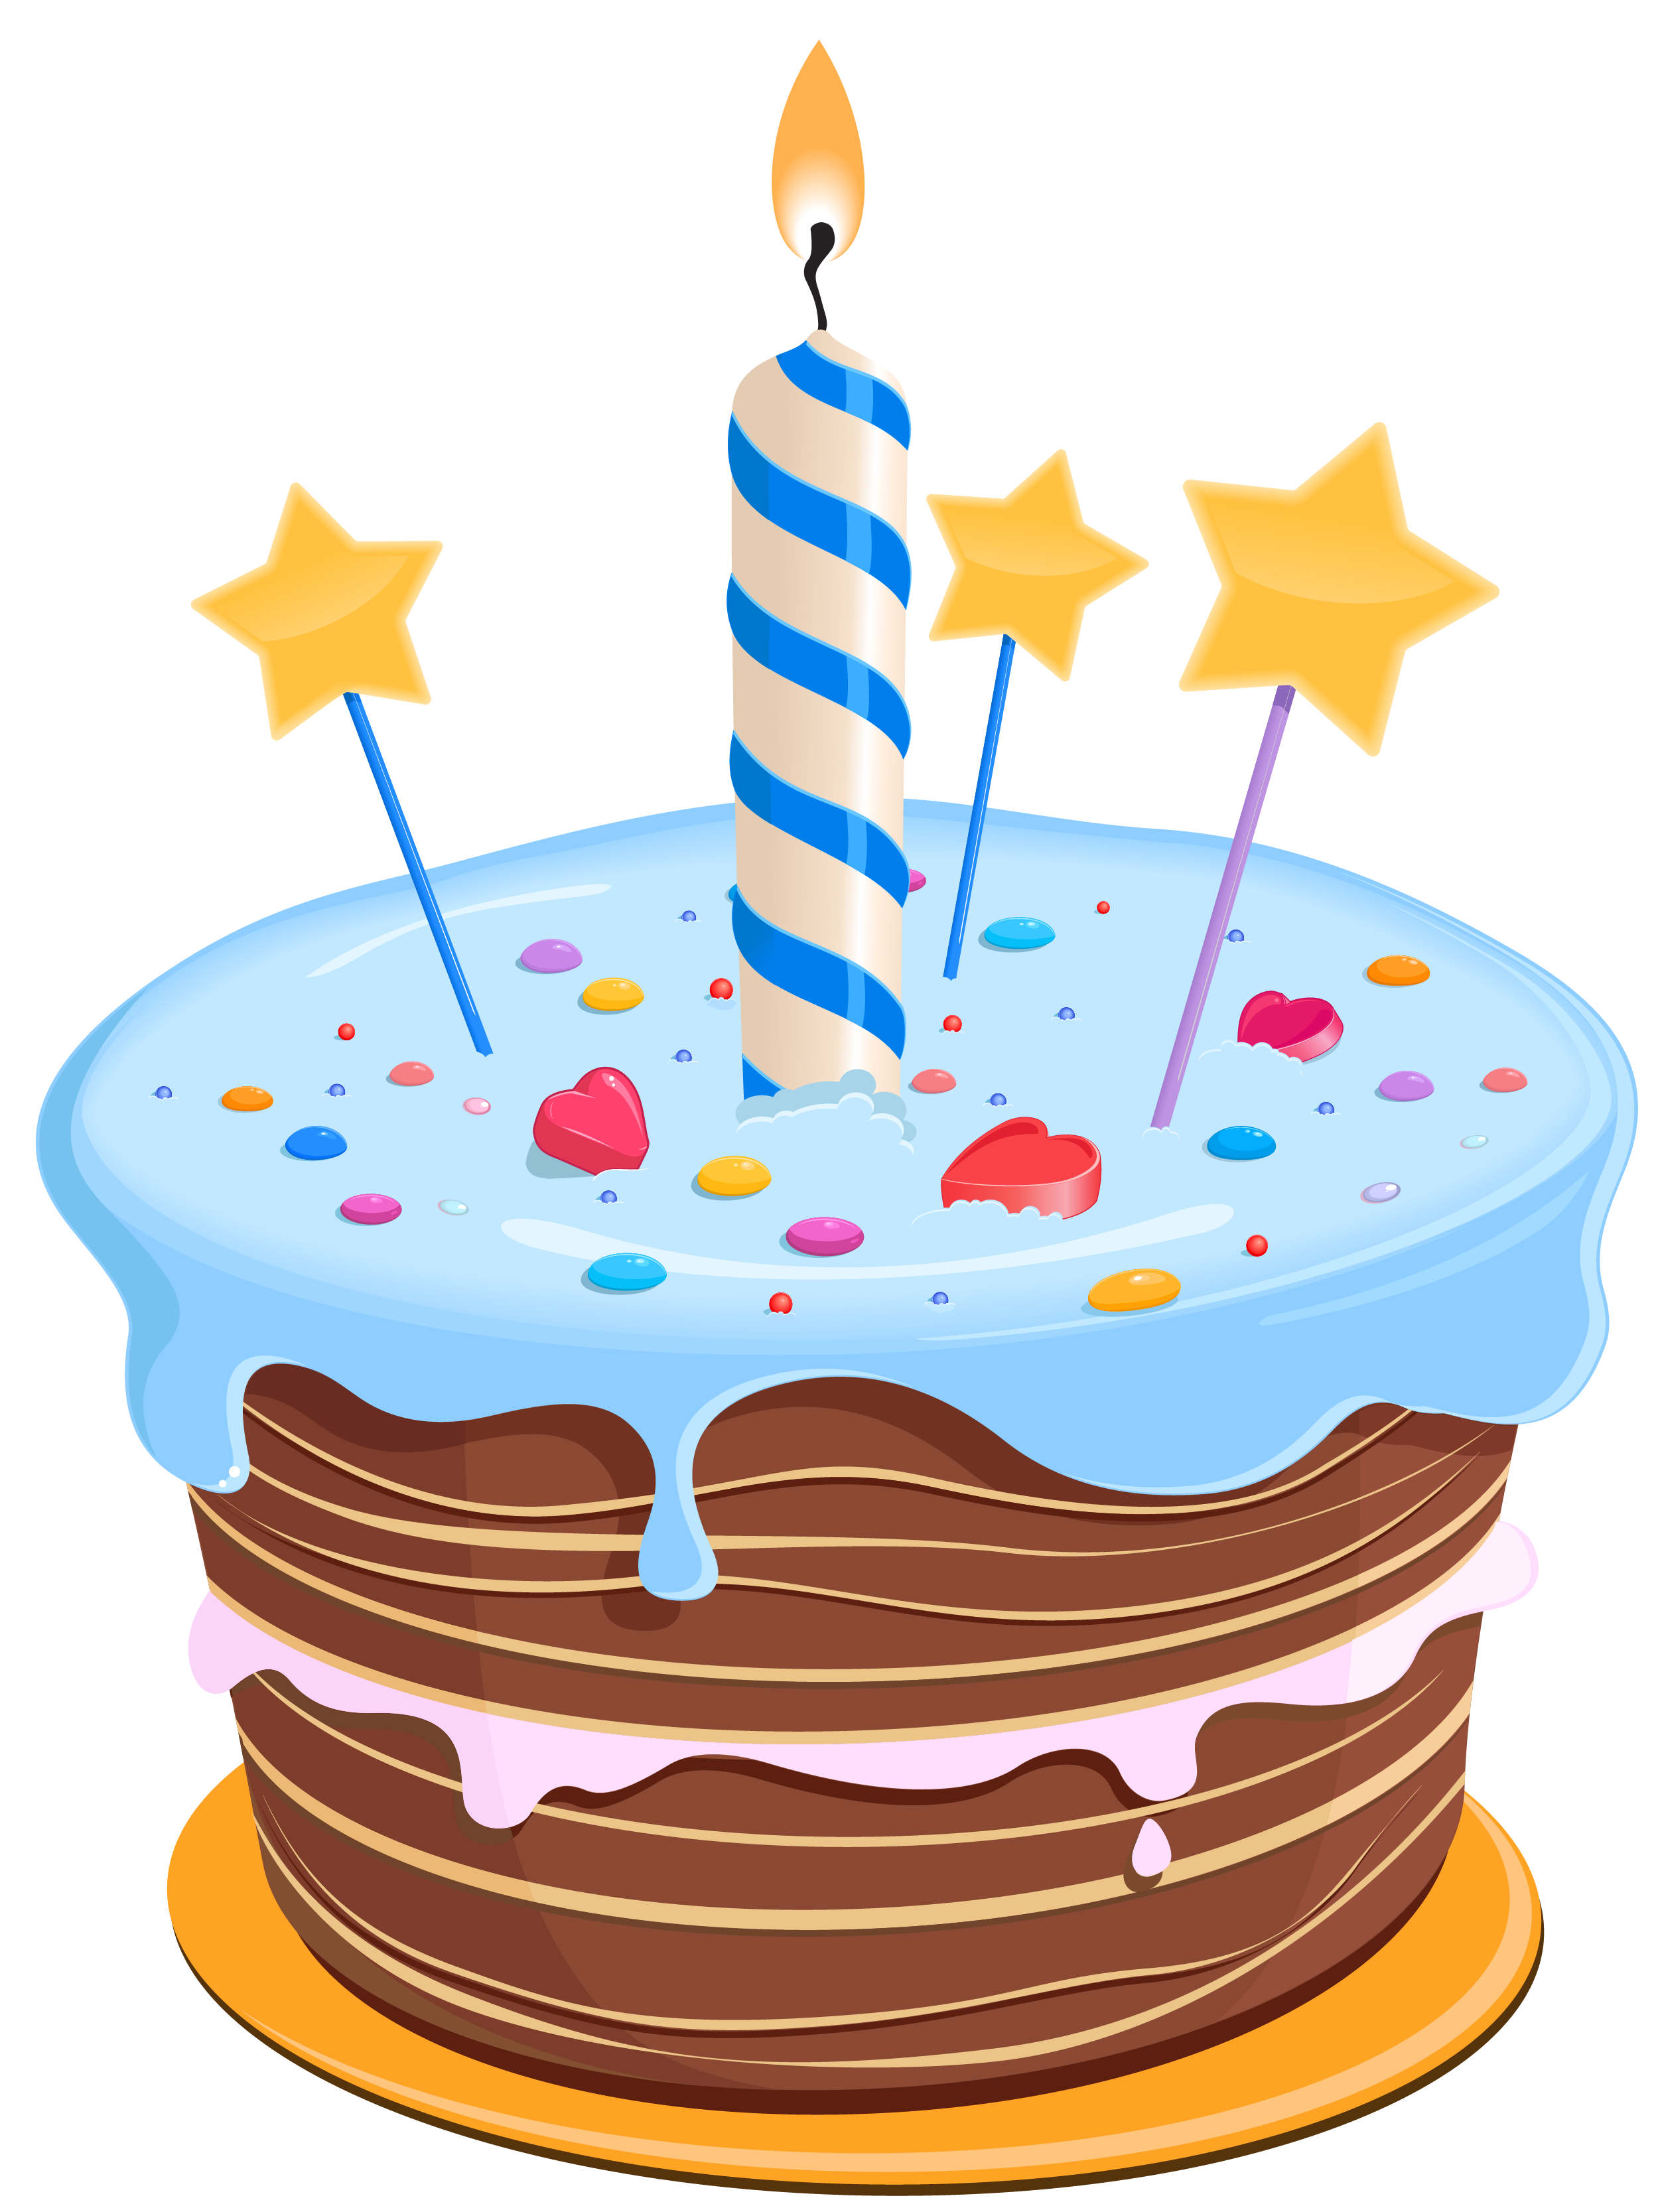 Colorful Birthday Cake with Candles Flat Icon on a Transparent Background  Stock Vector - Illustration of anniversary, graphic: 182087247